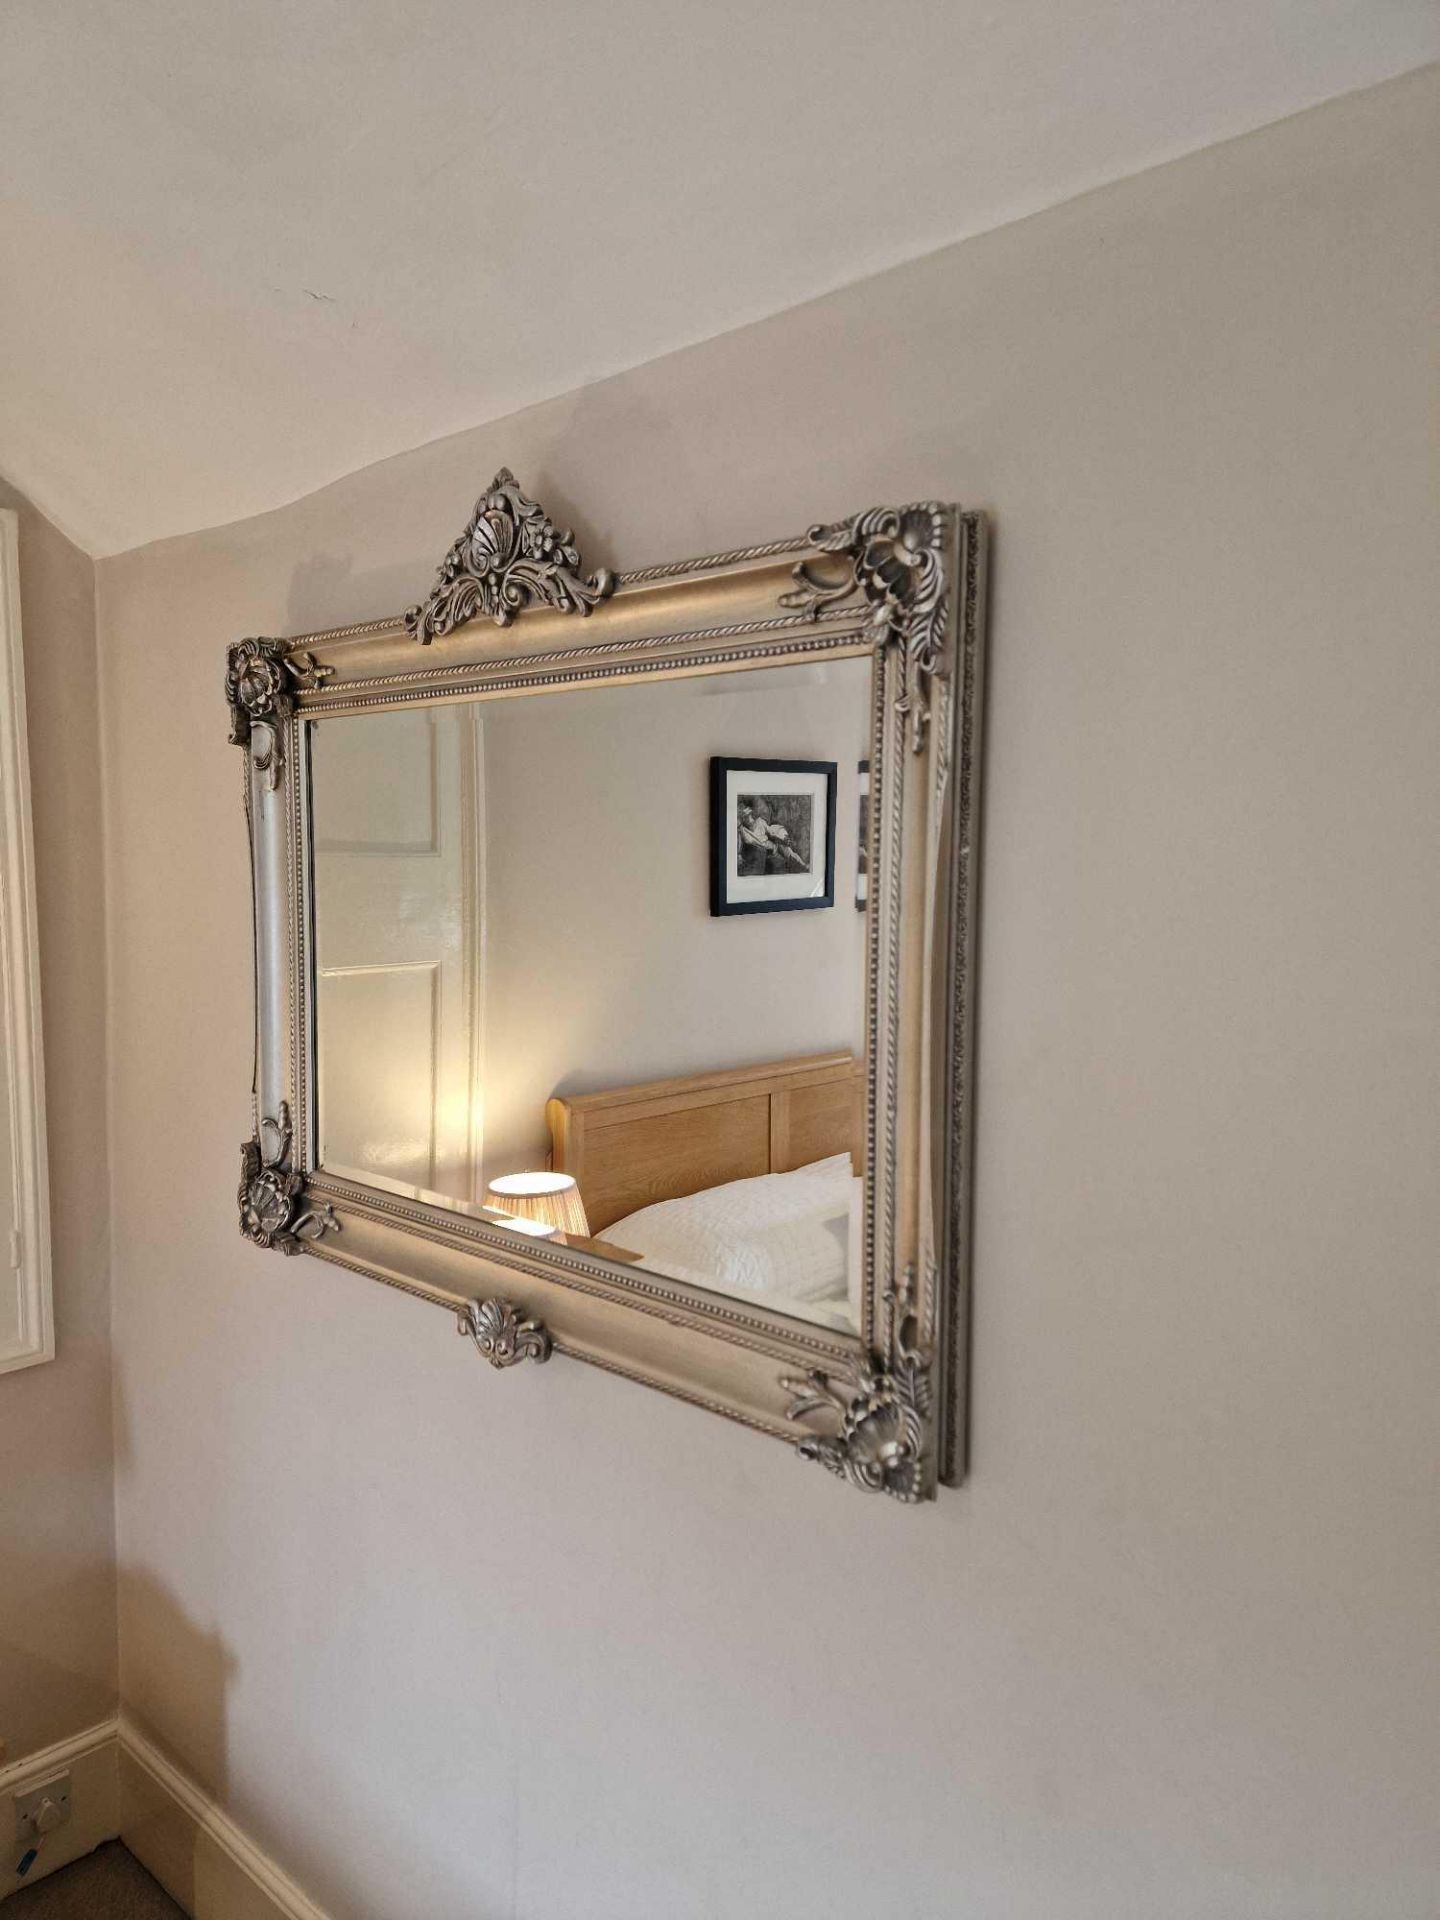 Large Rectangular Silver Painted Framed Mirror Boasting A Fabulous Decorative Silver Carved Effect